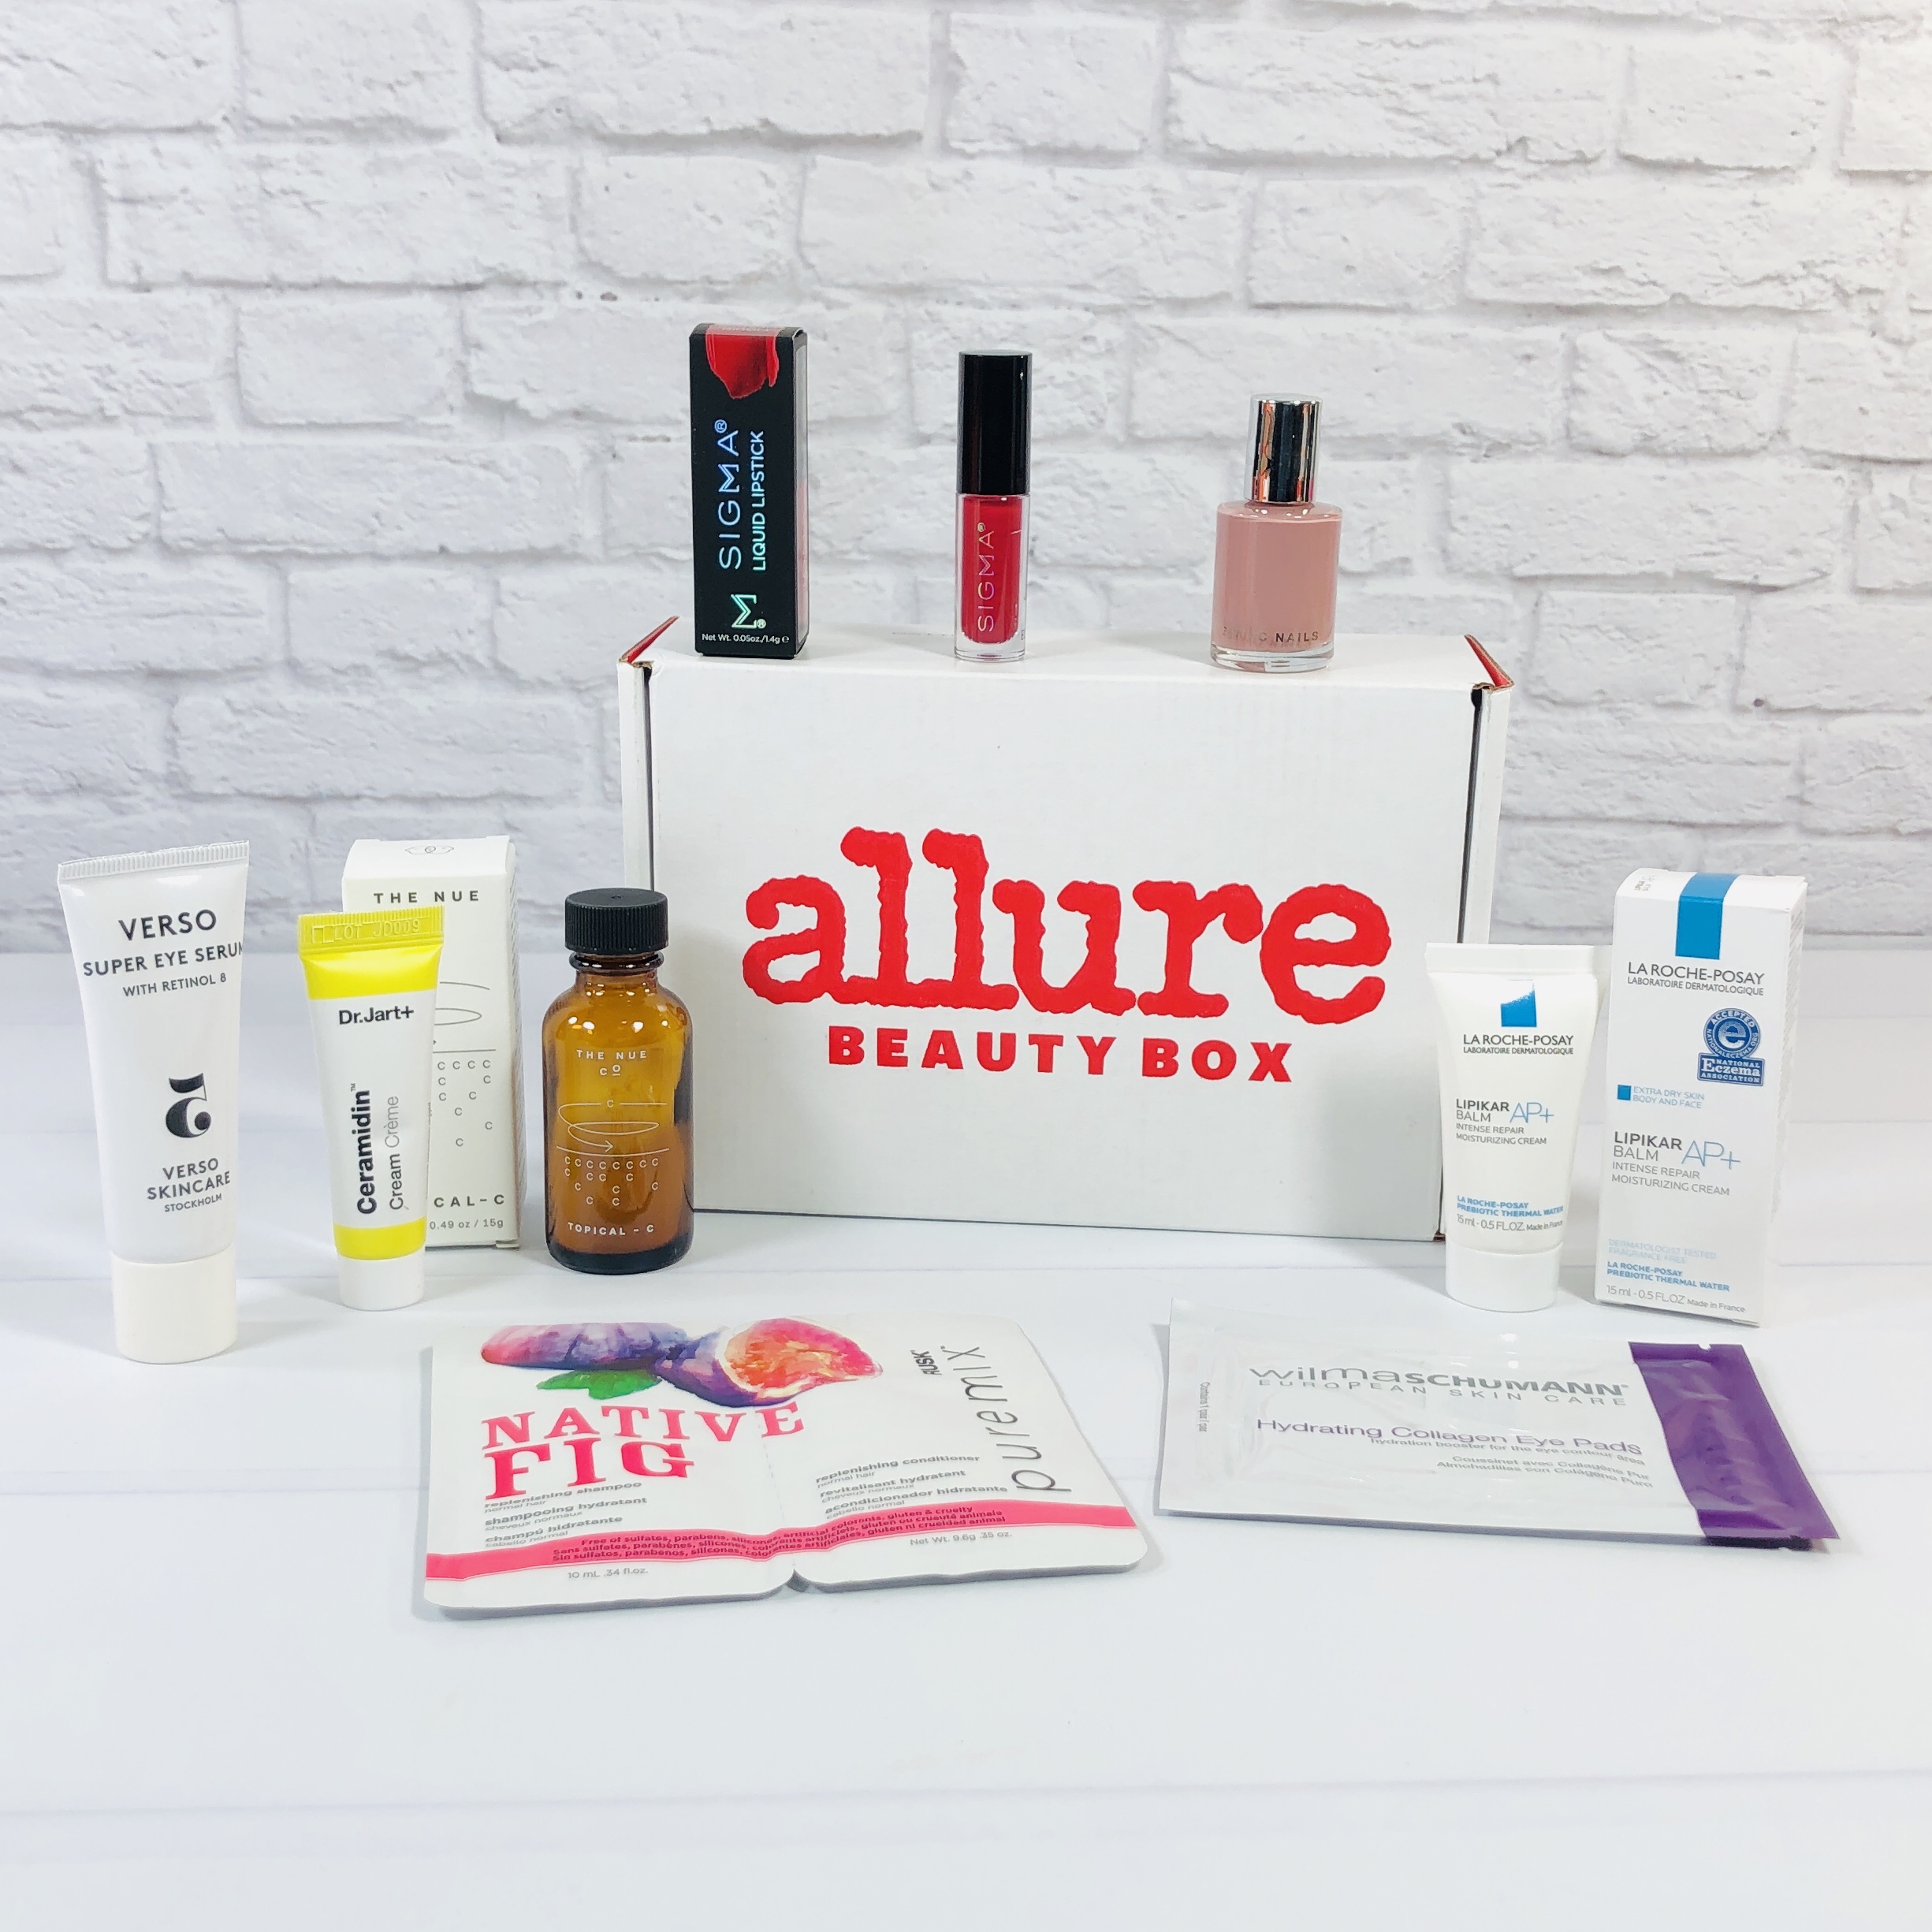 Allure Beauty Box Reviews Get All The Details At Hello Subscription!